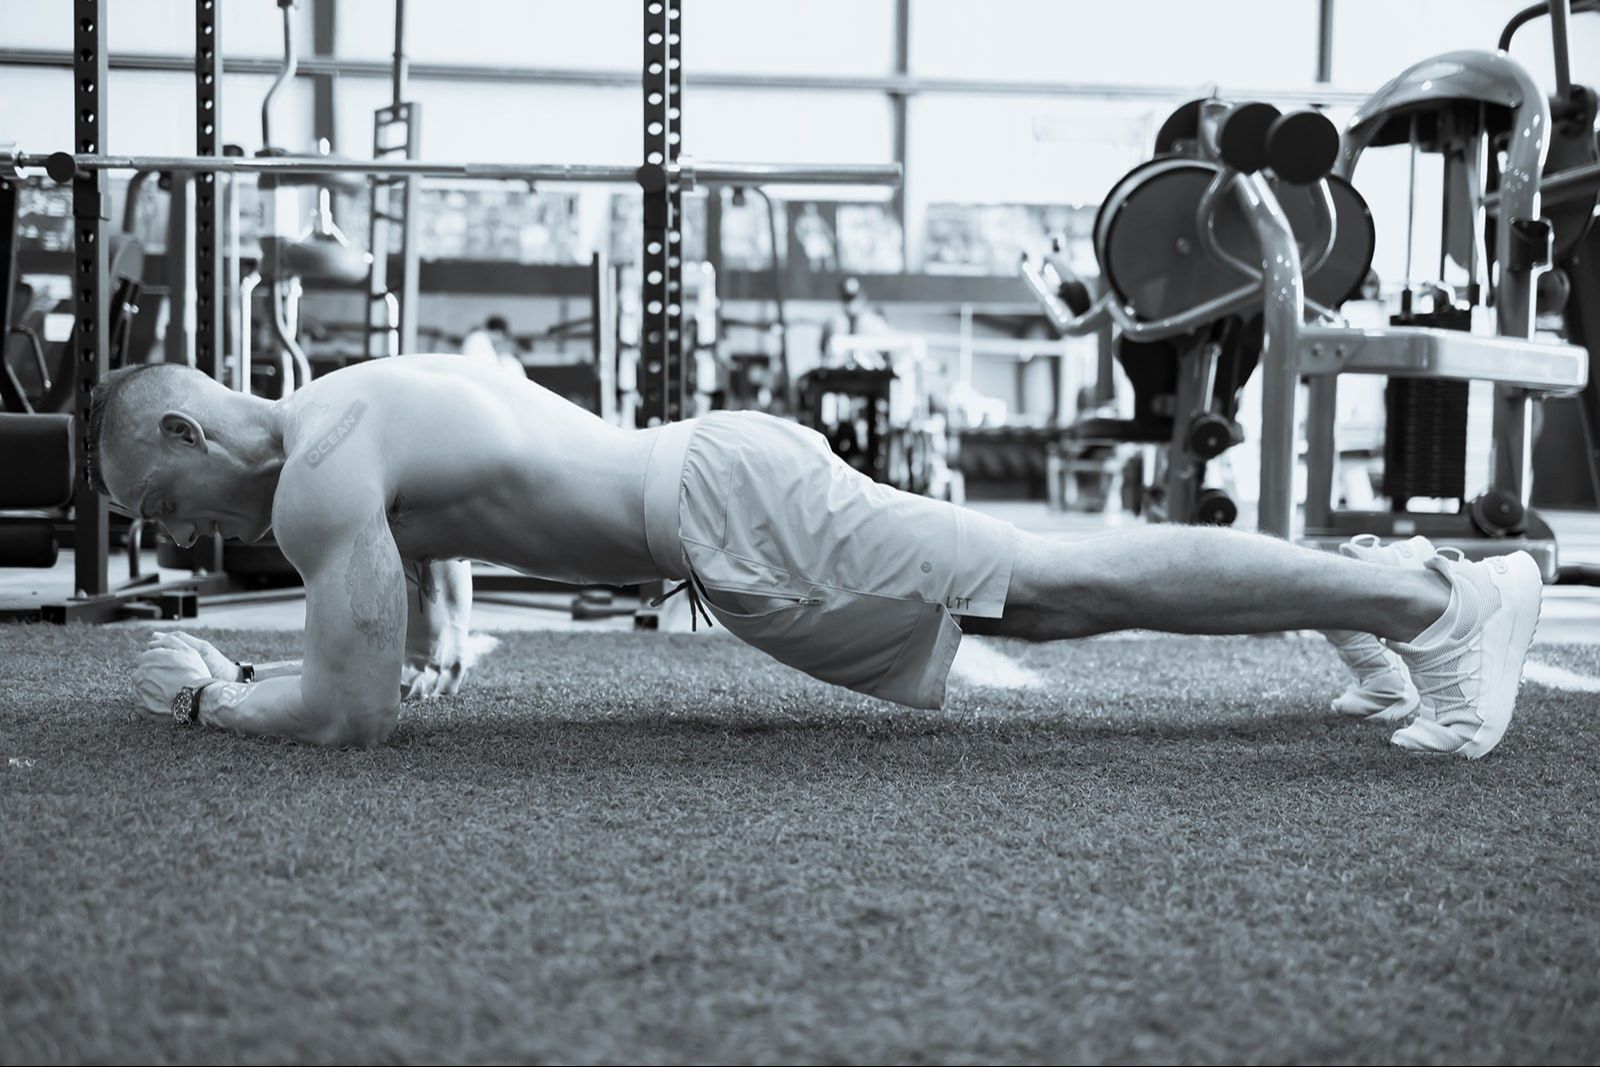 Man performing a plank exercise in a gym setting.